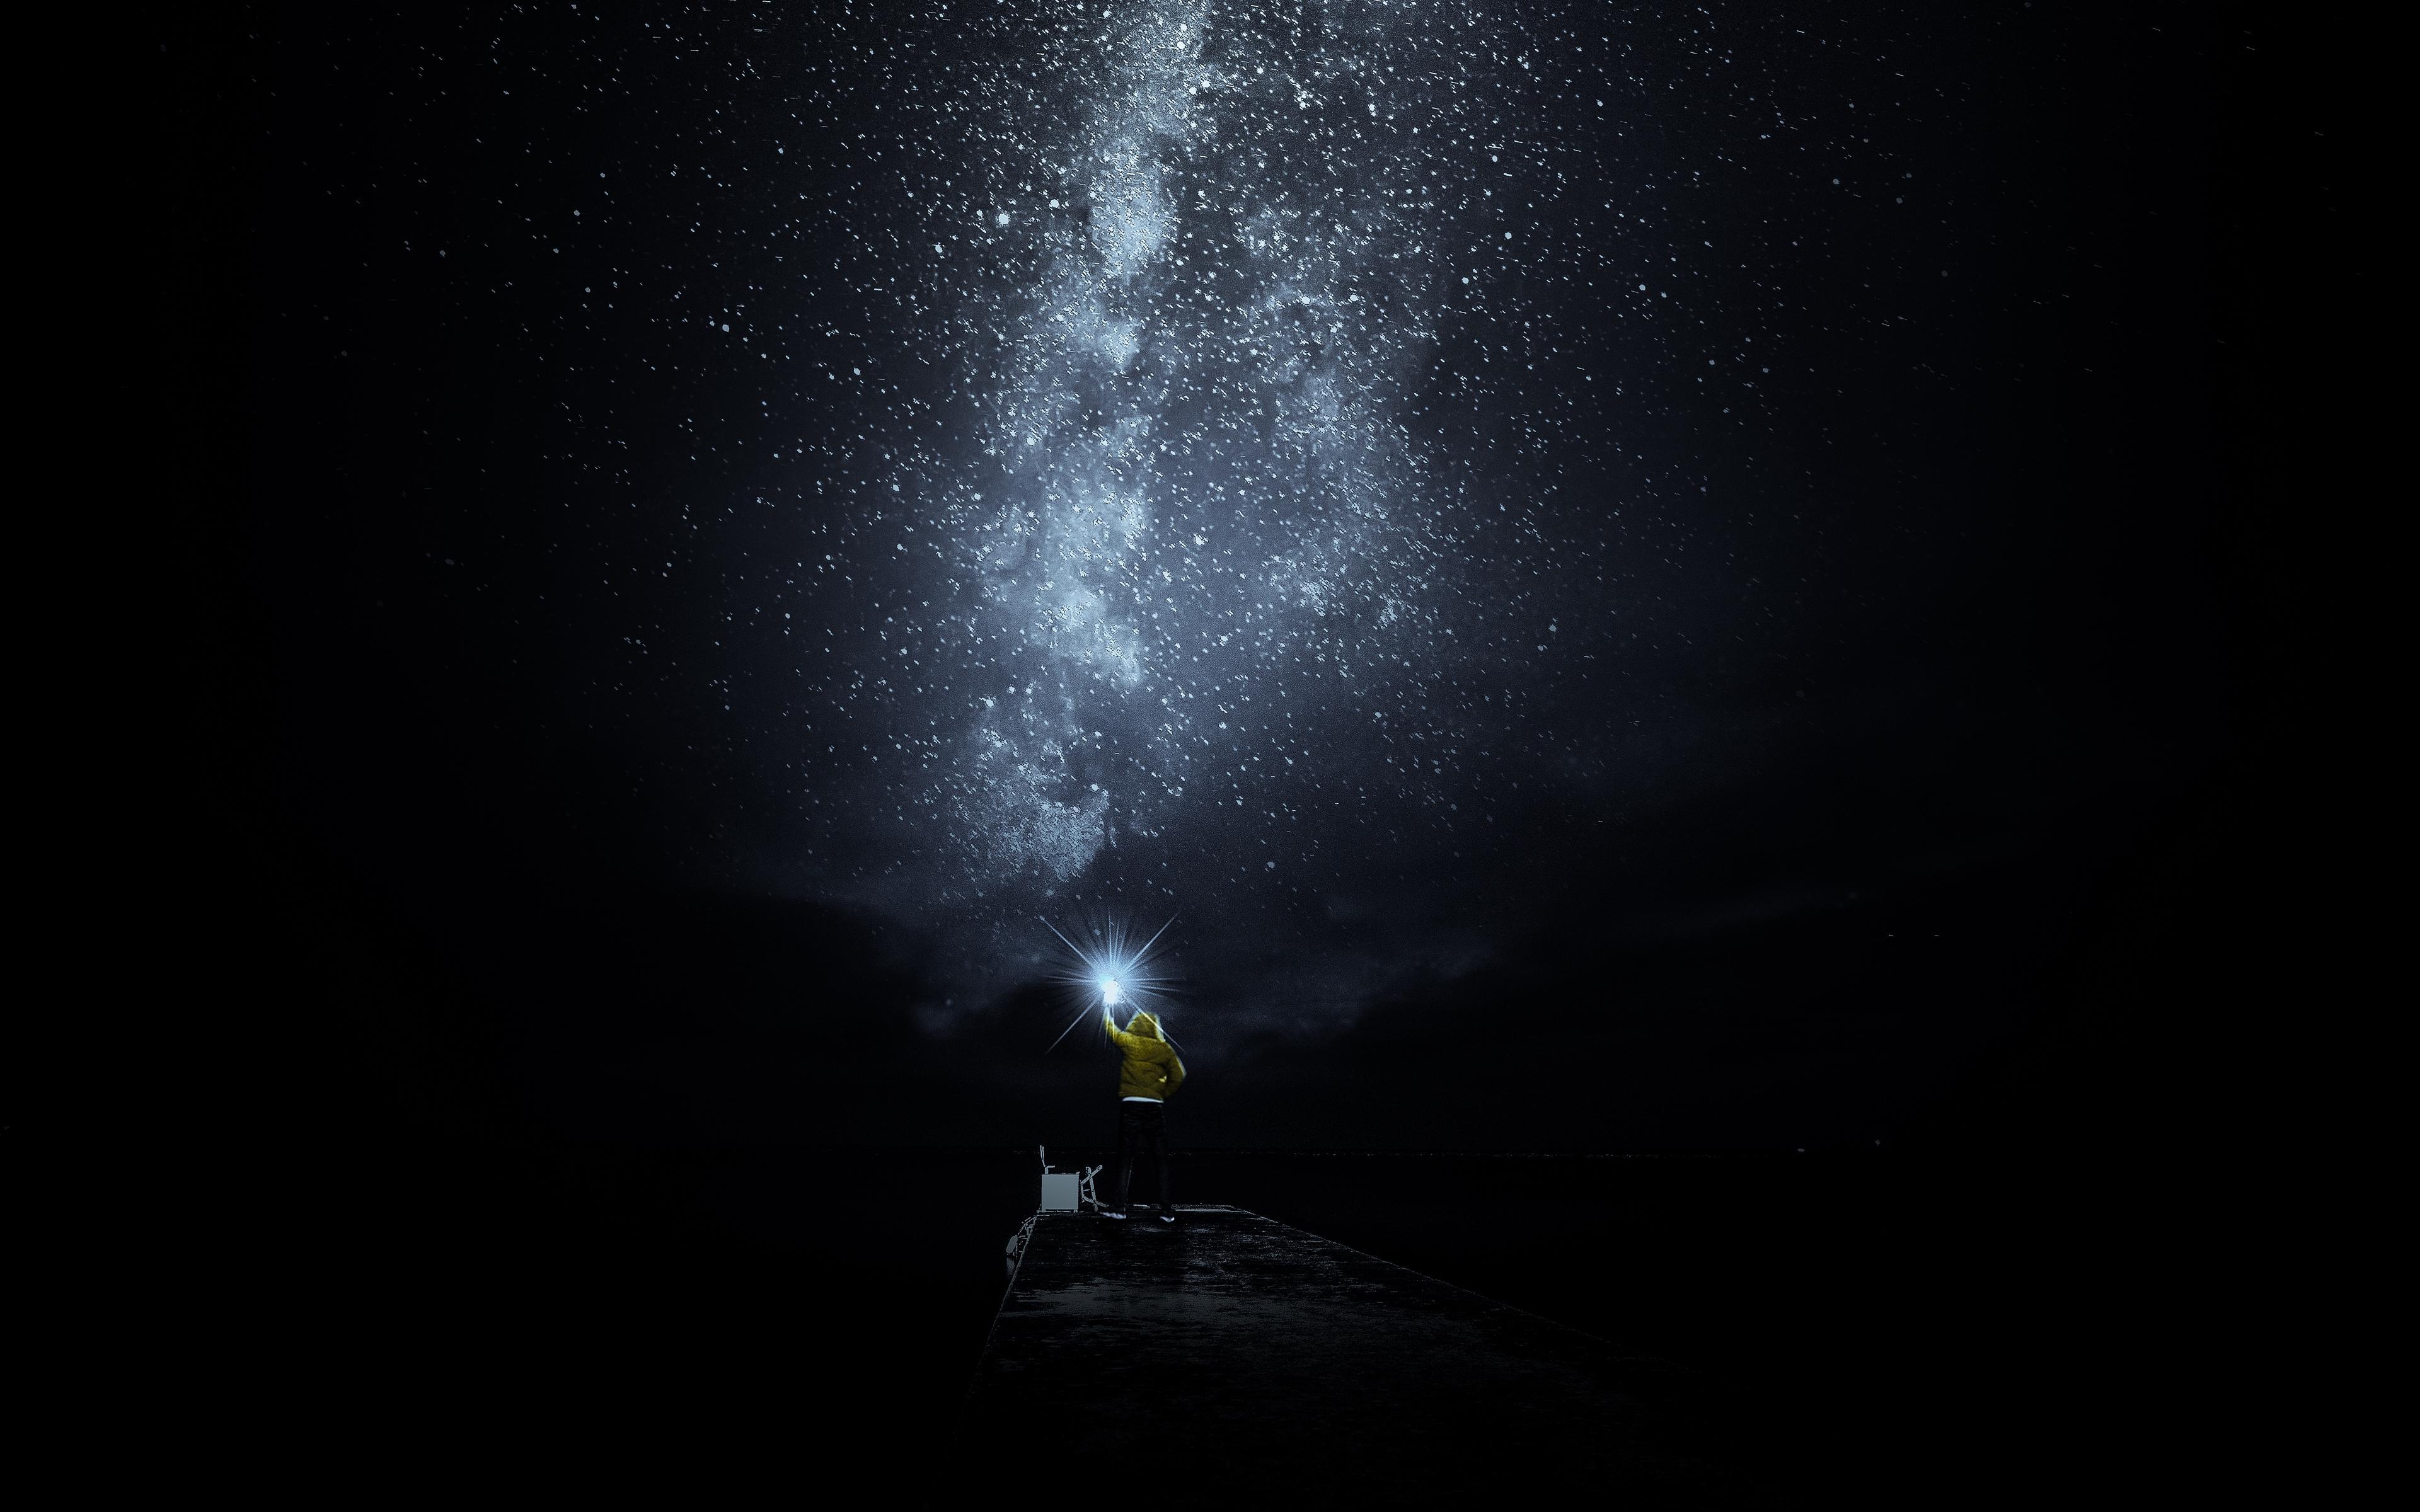 Download wallpaper 3840x2400 starry sky, man, loneliness, lonely